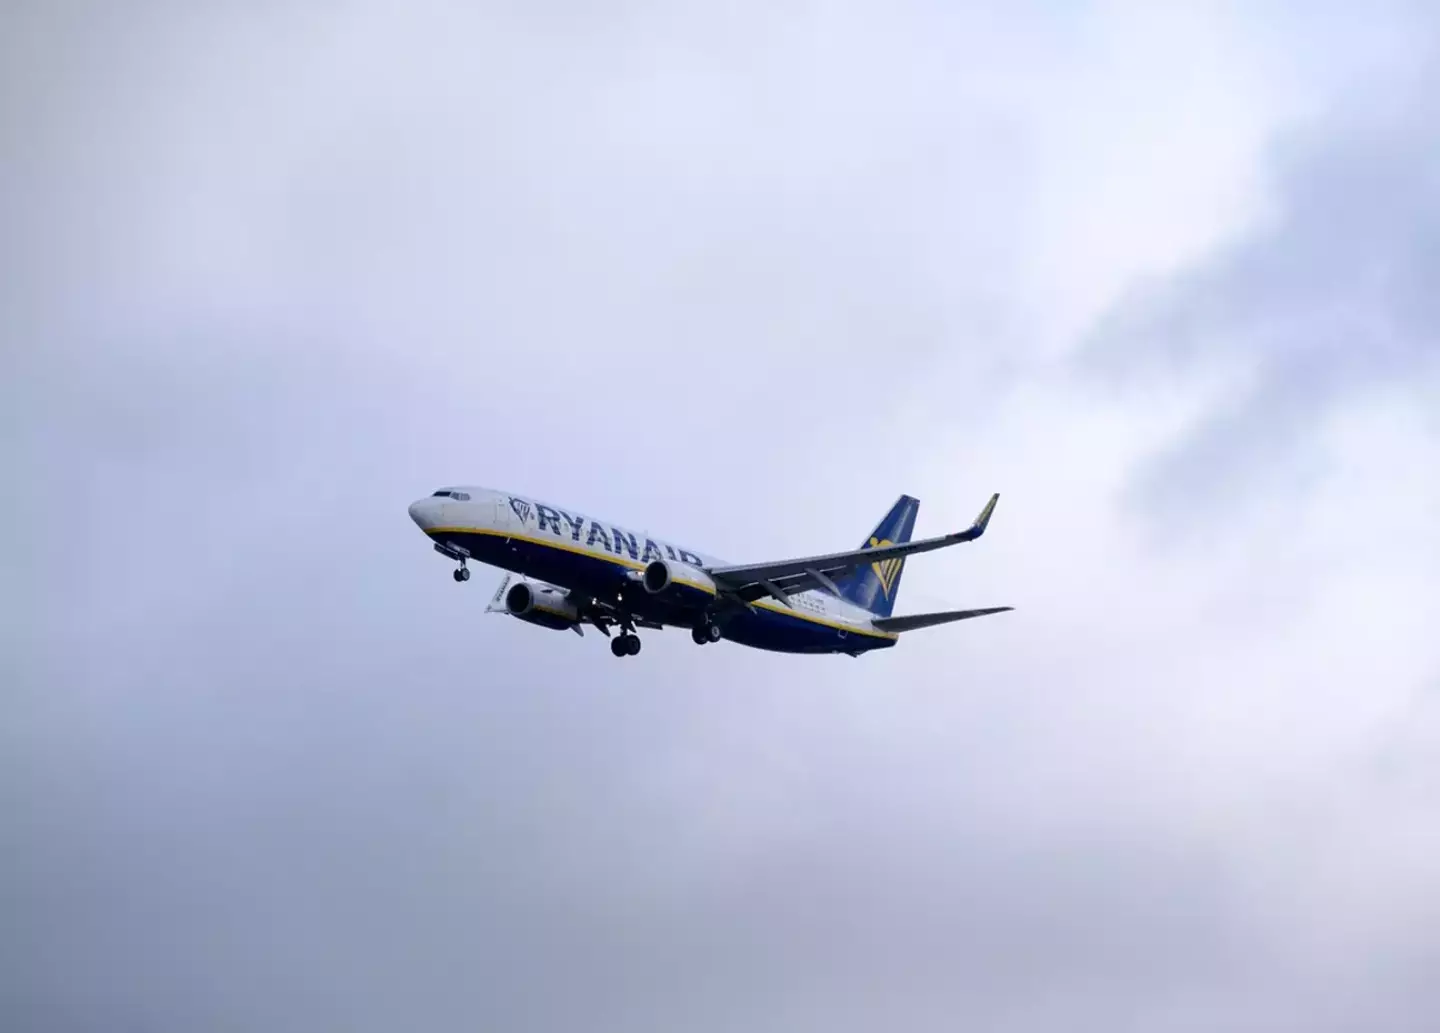 The Ryanair flight was forced to divert to Paris after being unable to land in Dublin.